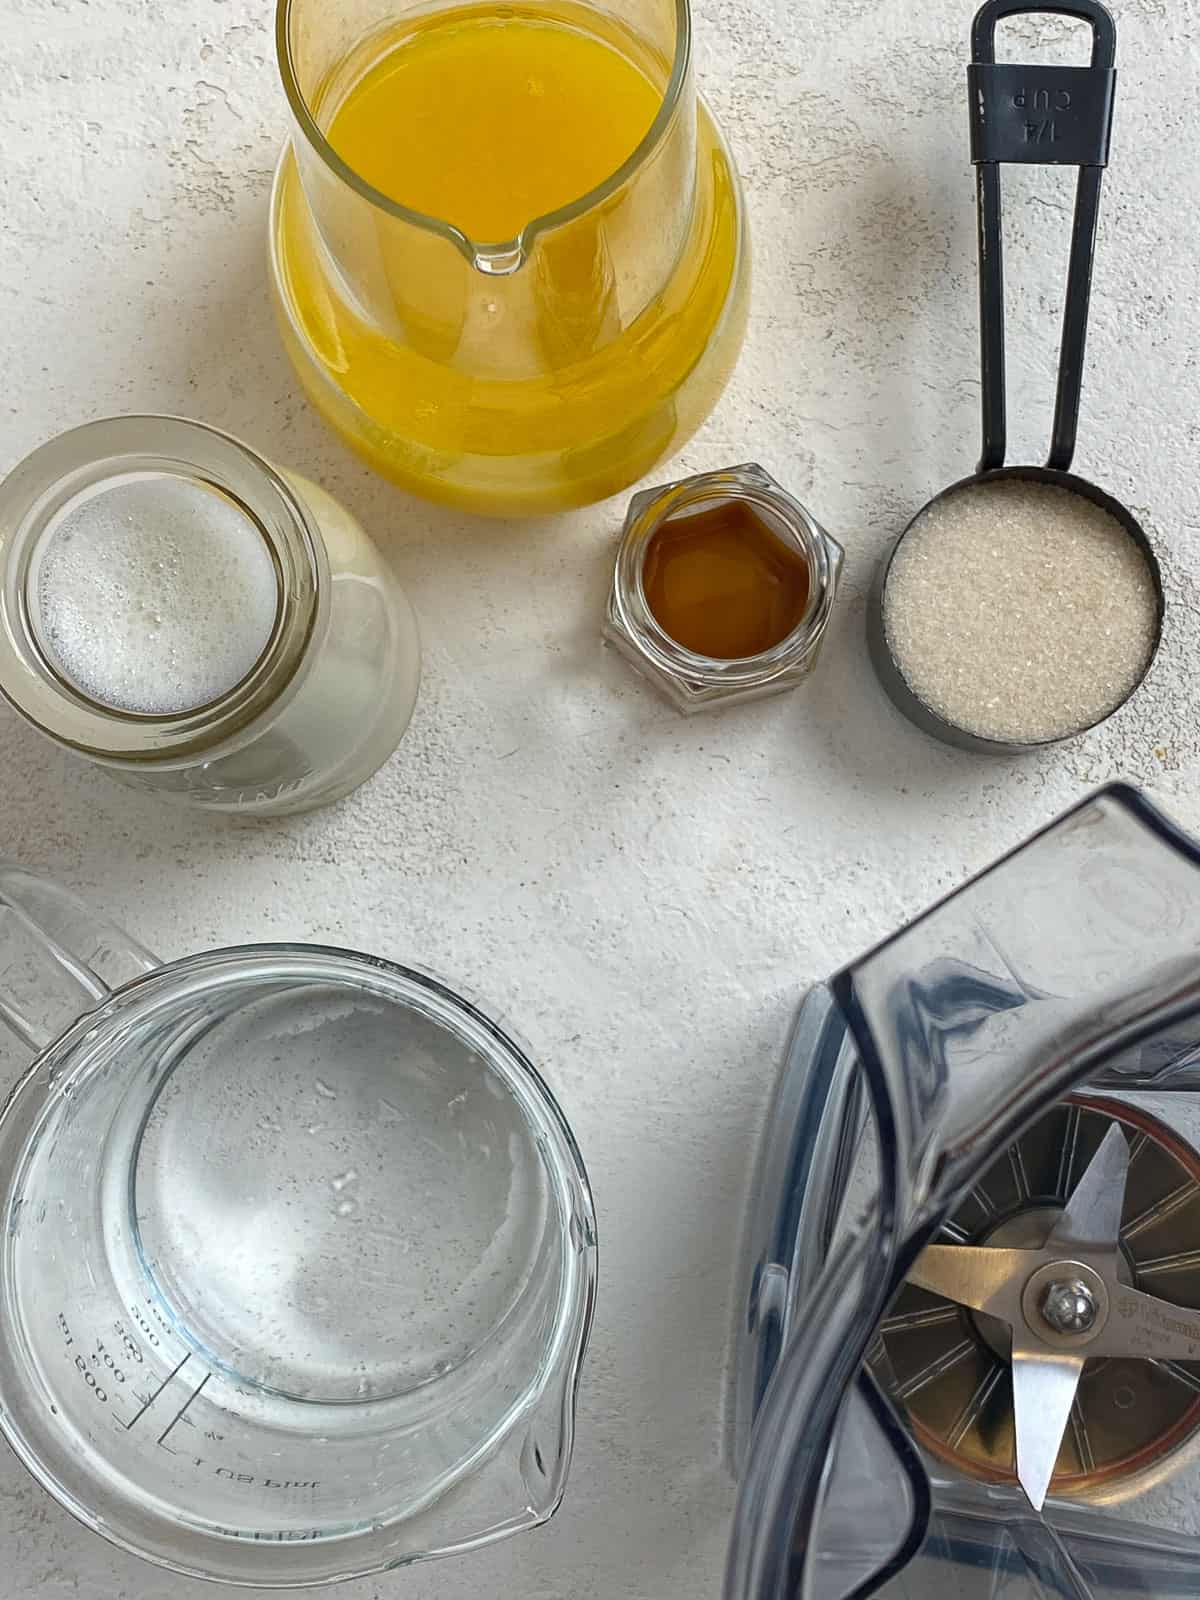 ingredients for Easy Orange Julius Smoothie Recipe measured out against a white surface